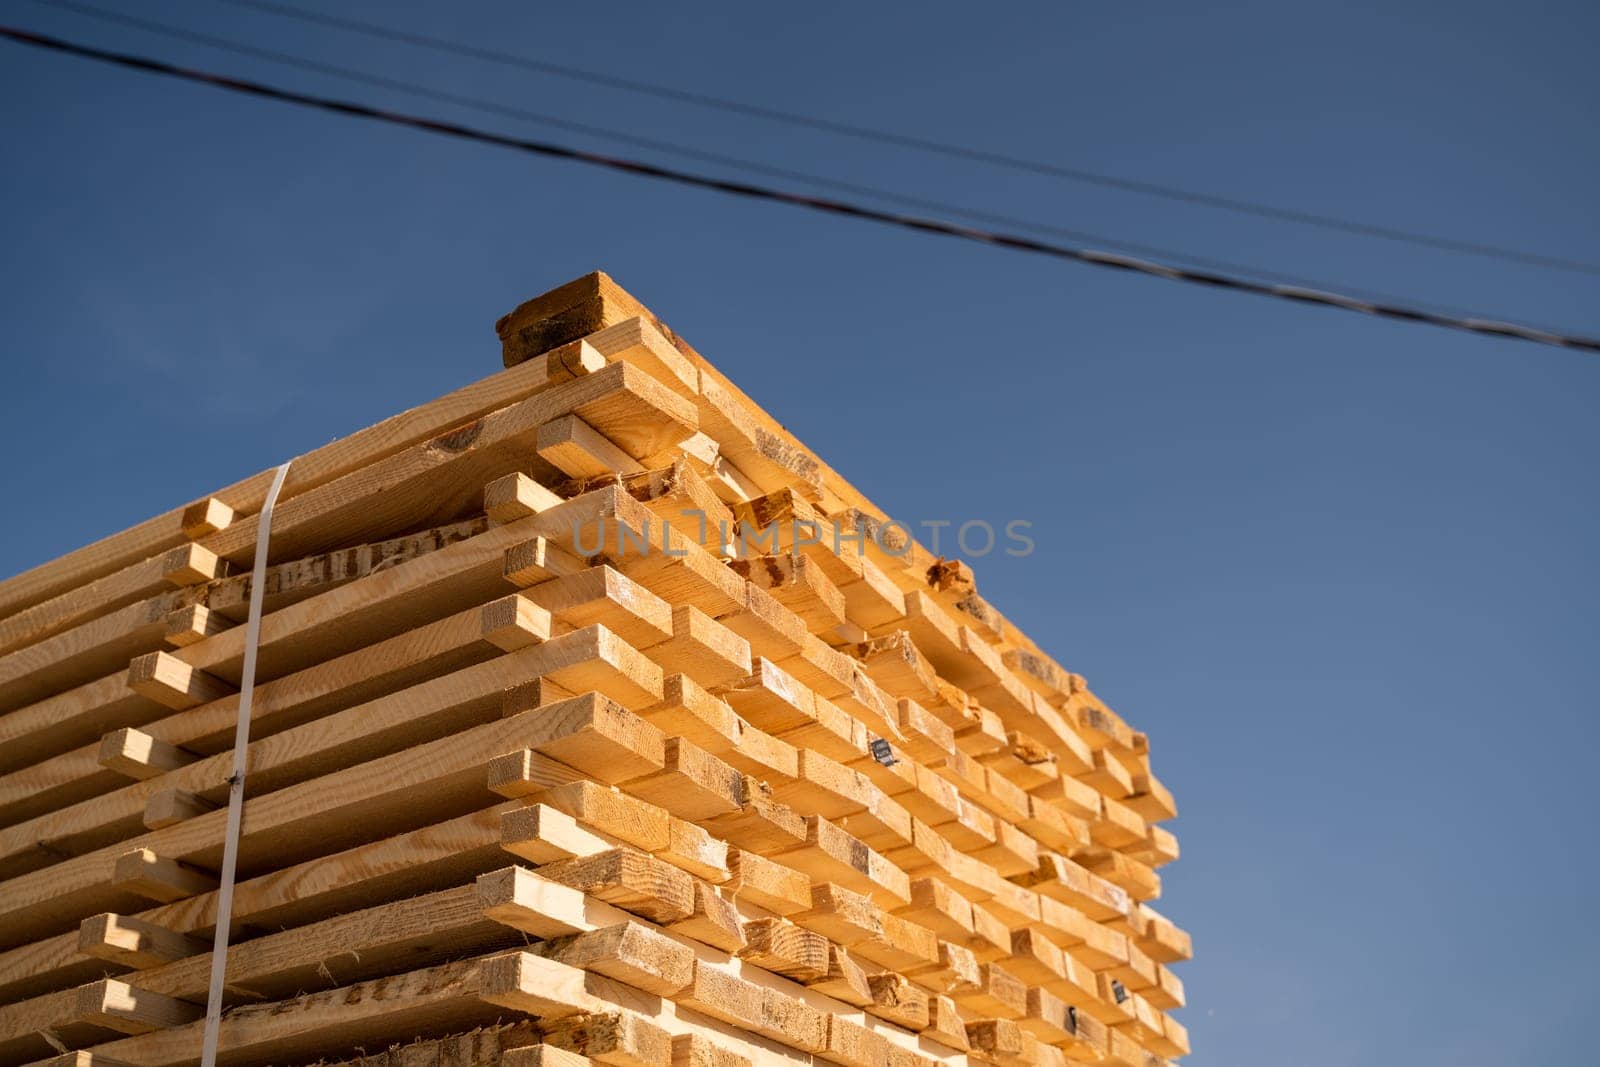 Stacked raw wooden boards at a outdoor lumber warehouse. Wood industry. by vovsht